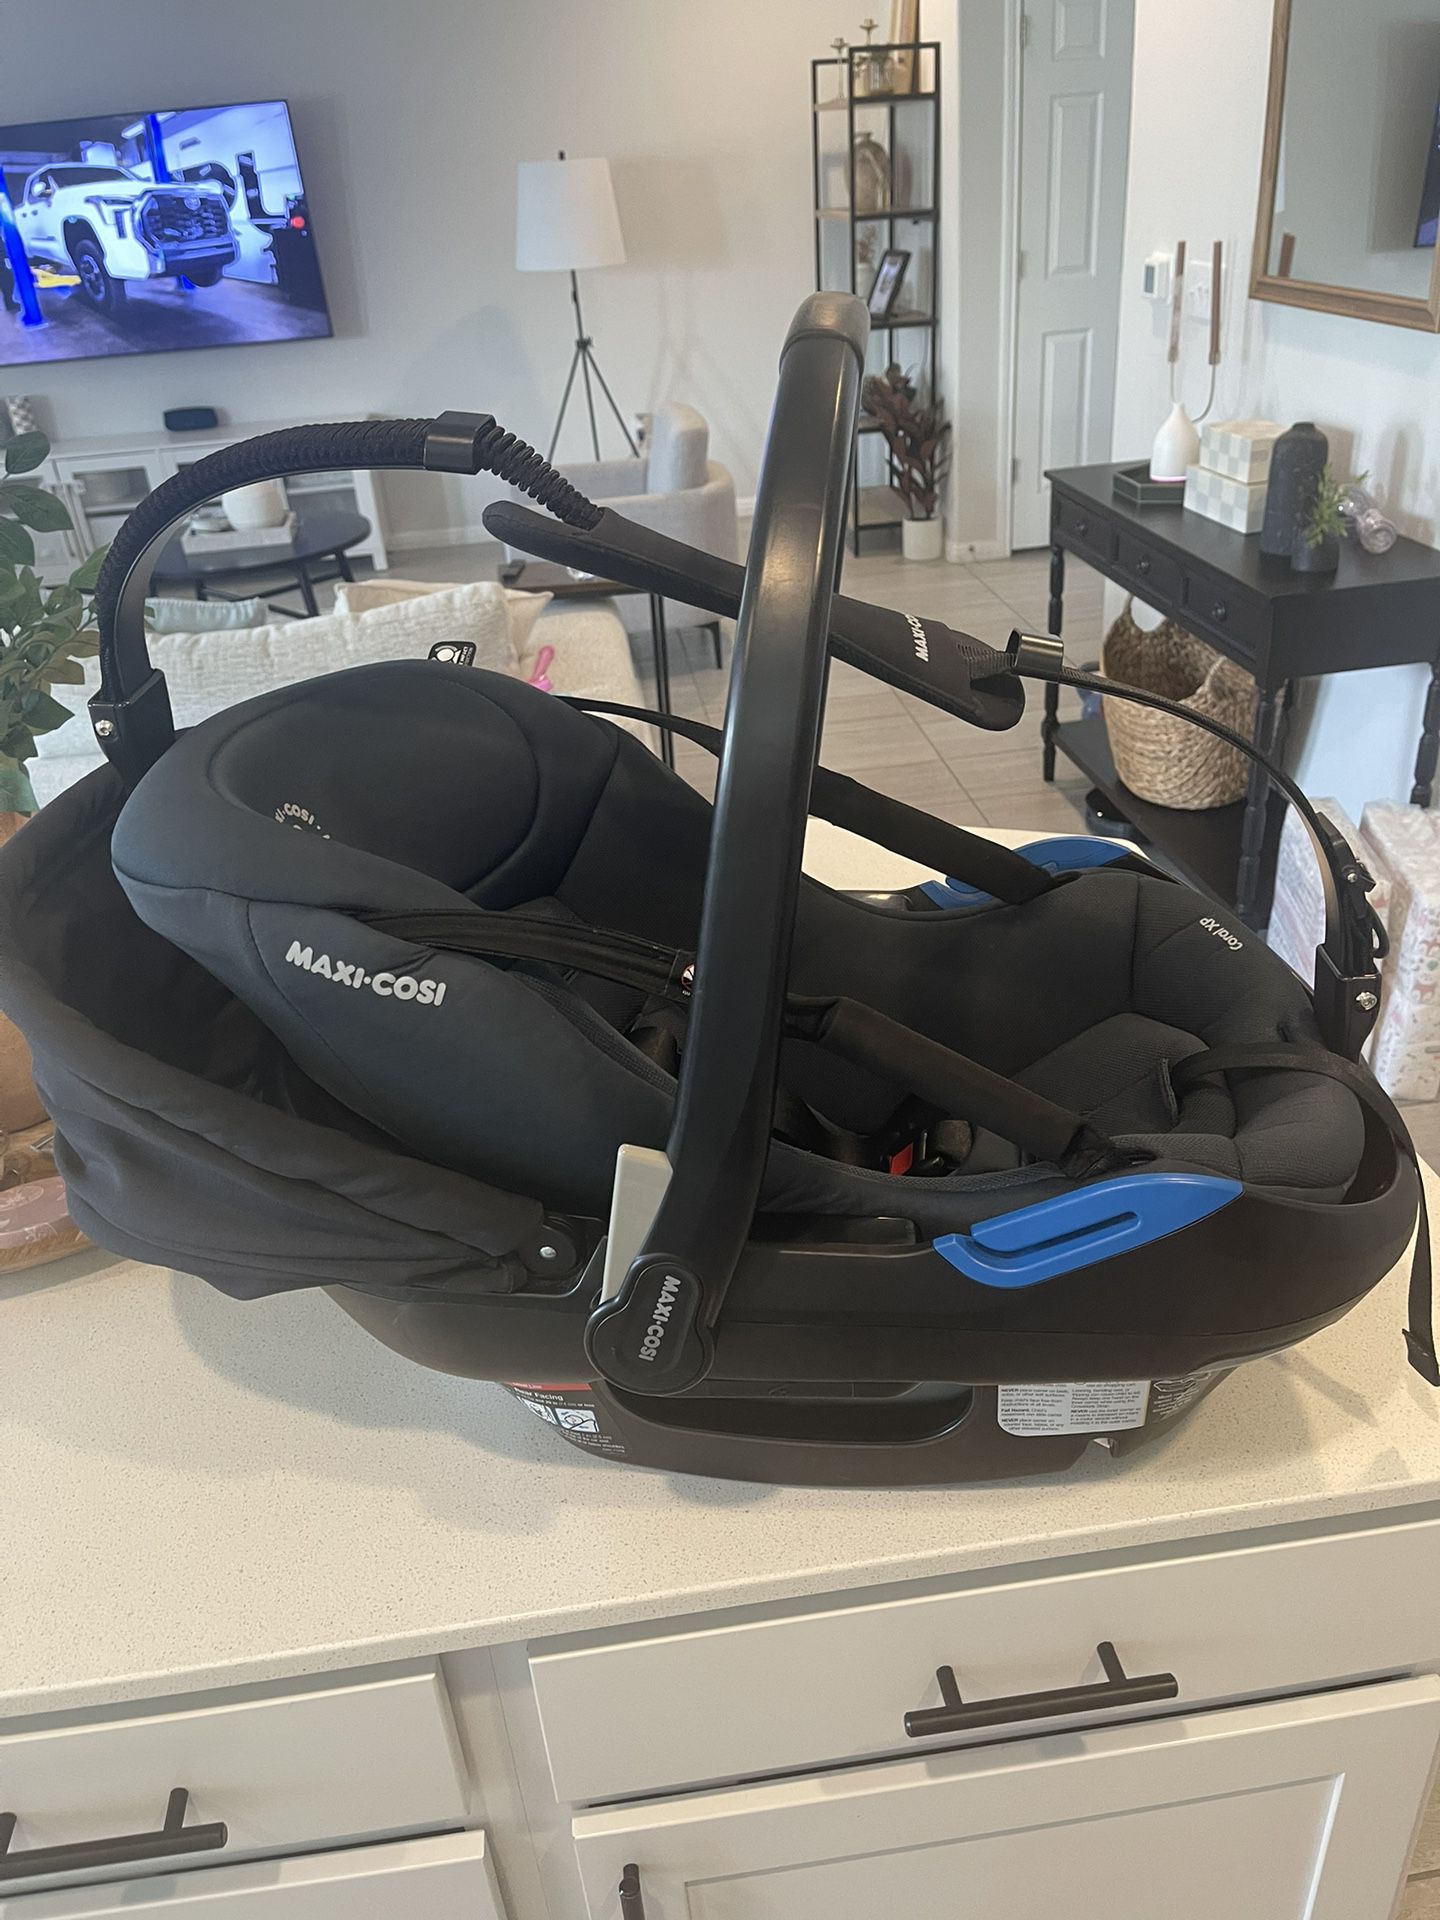 Infant Car Seat By Maxi Cosi 200.00 